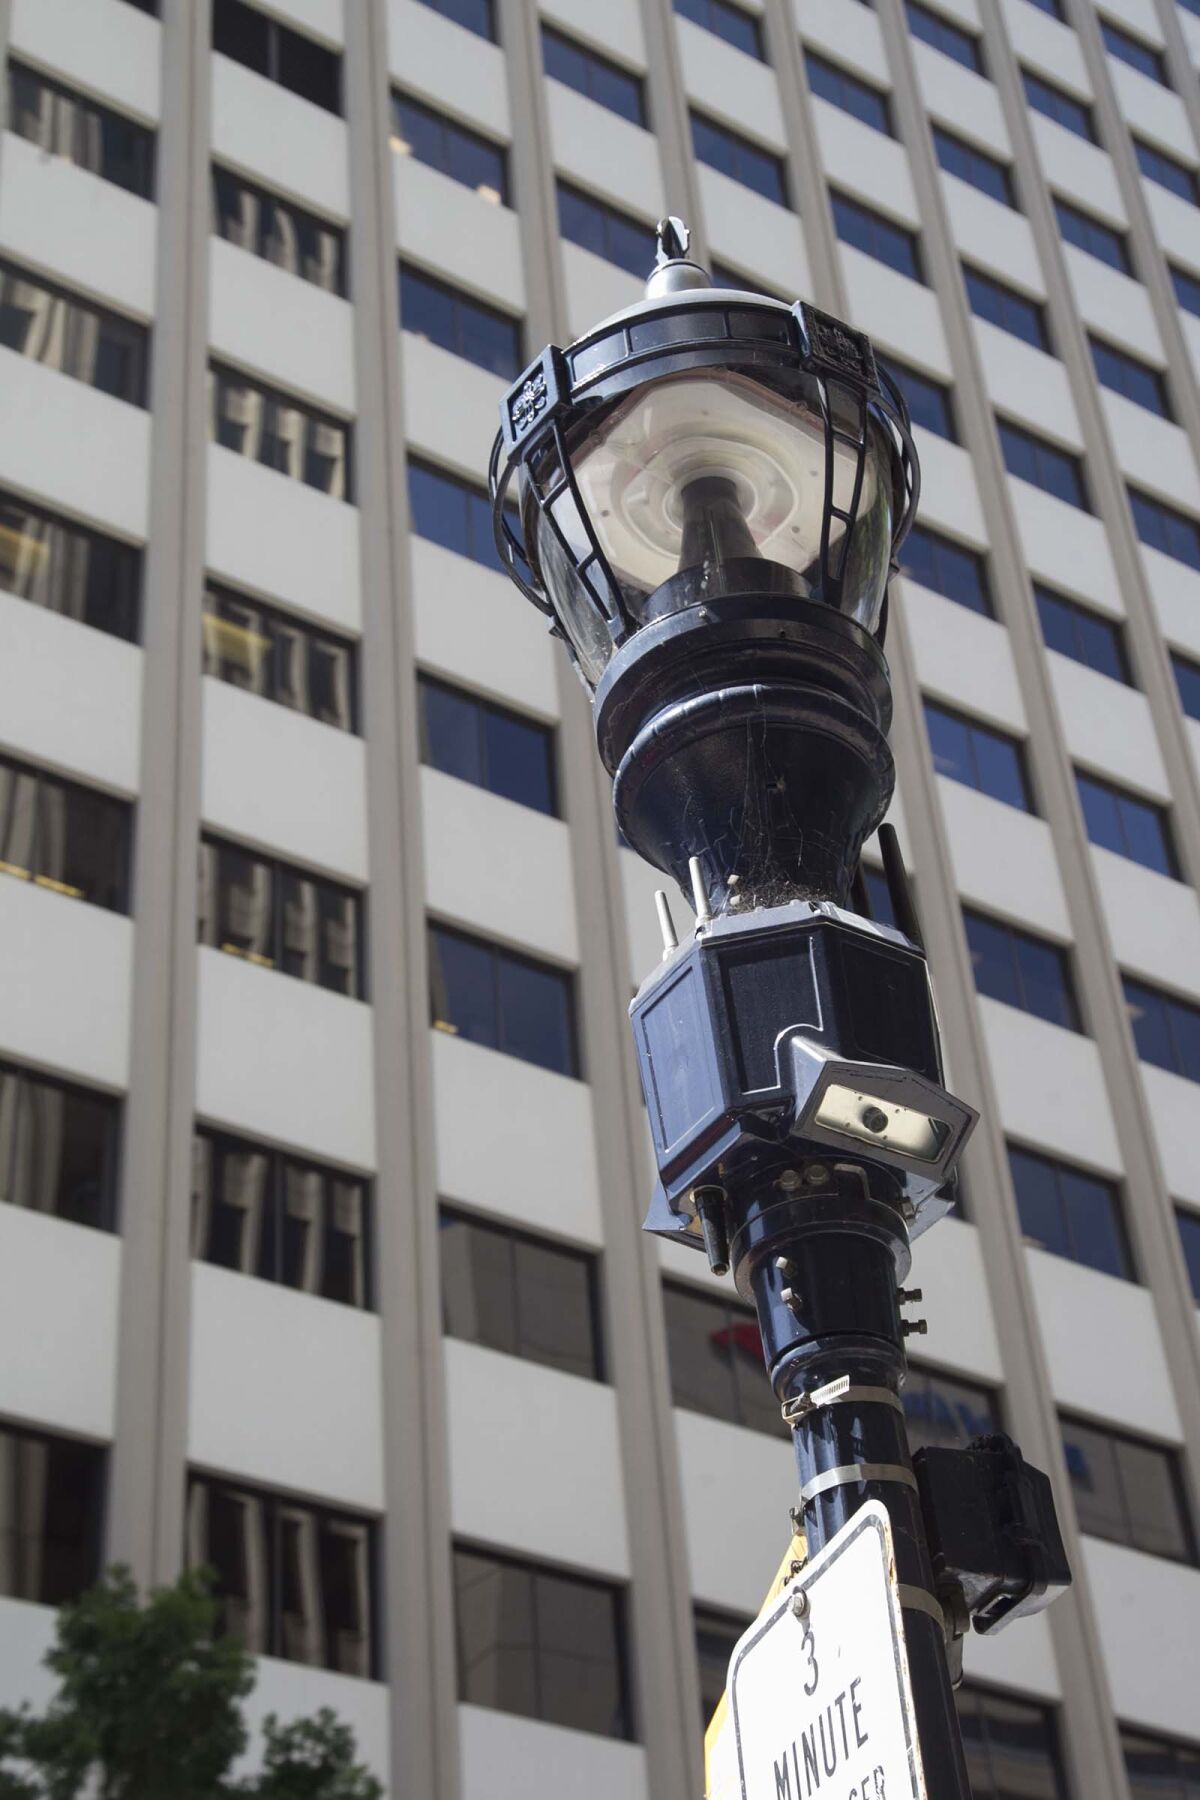 The city of San Diego has already installed thousands of "Smart Street Lamps" that include an array of sensors including video and audio that is used by law enforcement and other city entities. On a street lamp downtown, a module below the light houses the cameras, antennas and other instruments.